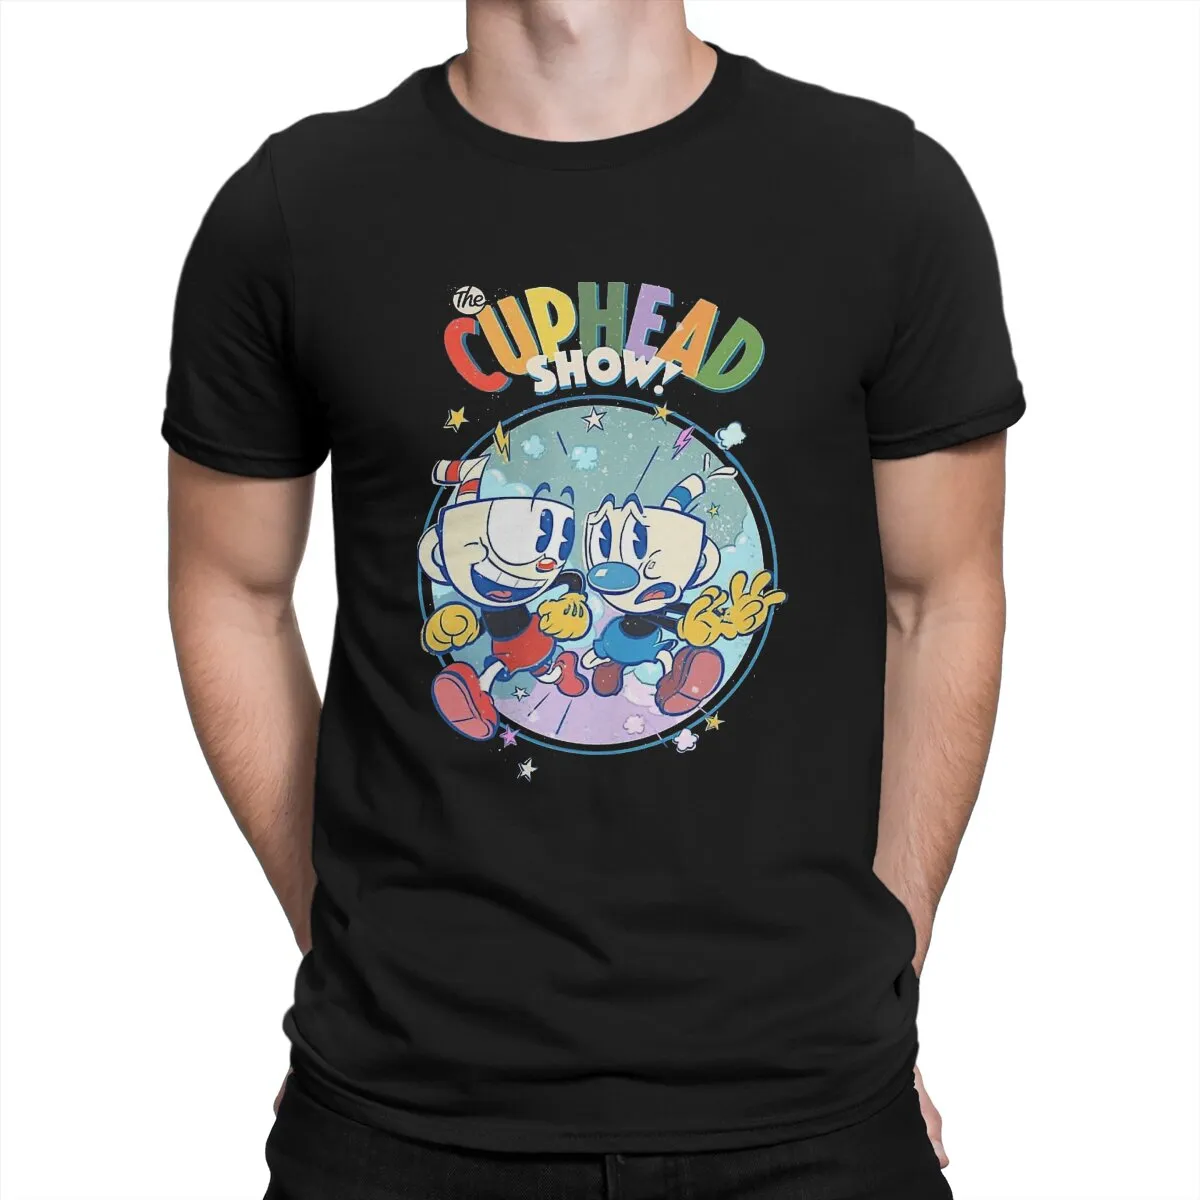 Color Men T Shirt Cuphead Creative Tees Short Sleeve Crew Neck T Shirts Pure Cotton Gift - Cuphead Store